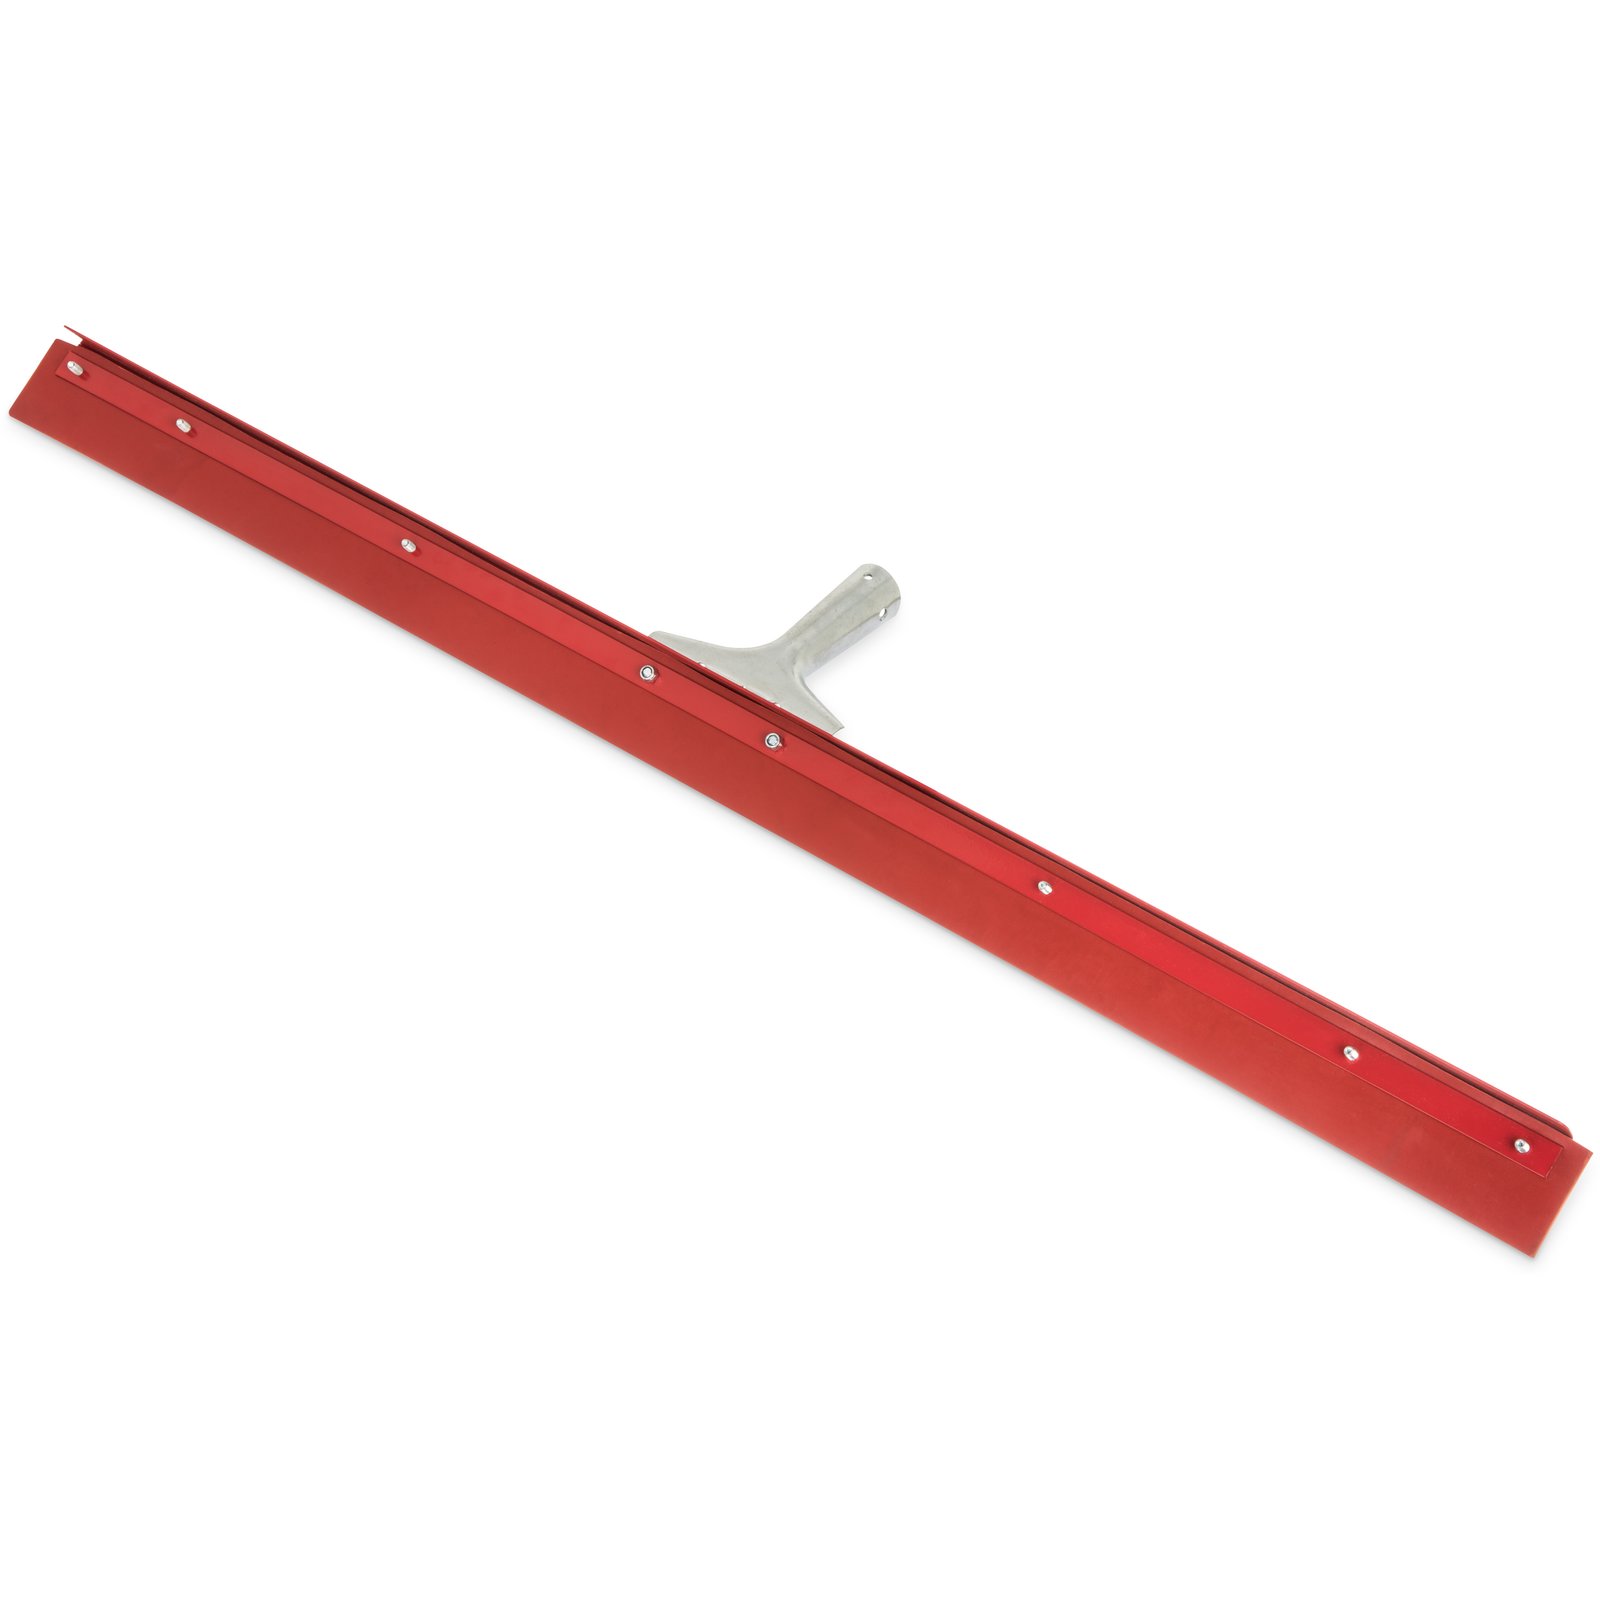 Lot of 12 Carlisle 12" Red Squeegee Gum Rubber Refills 4105700 